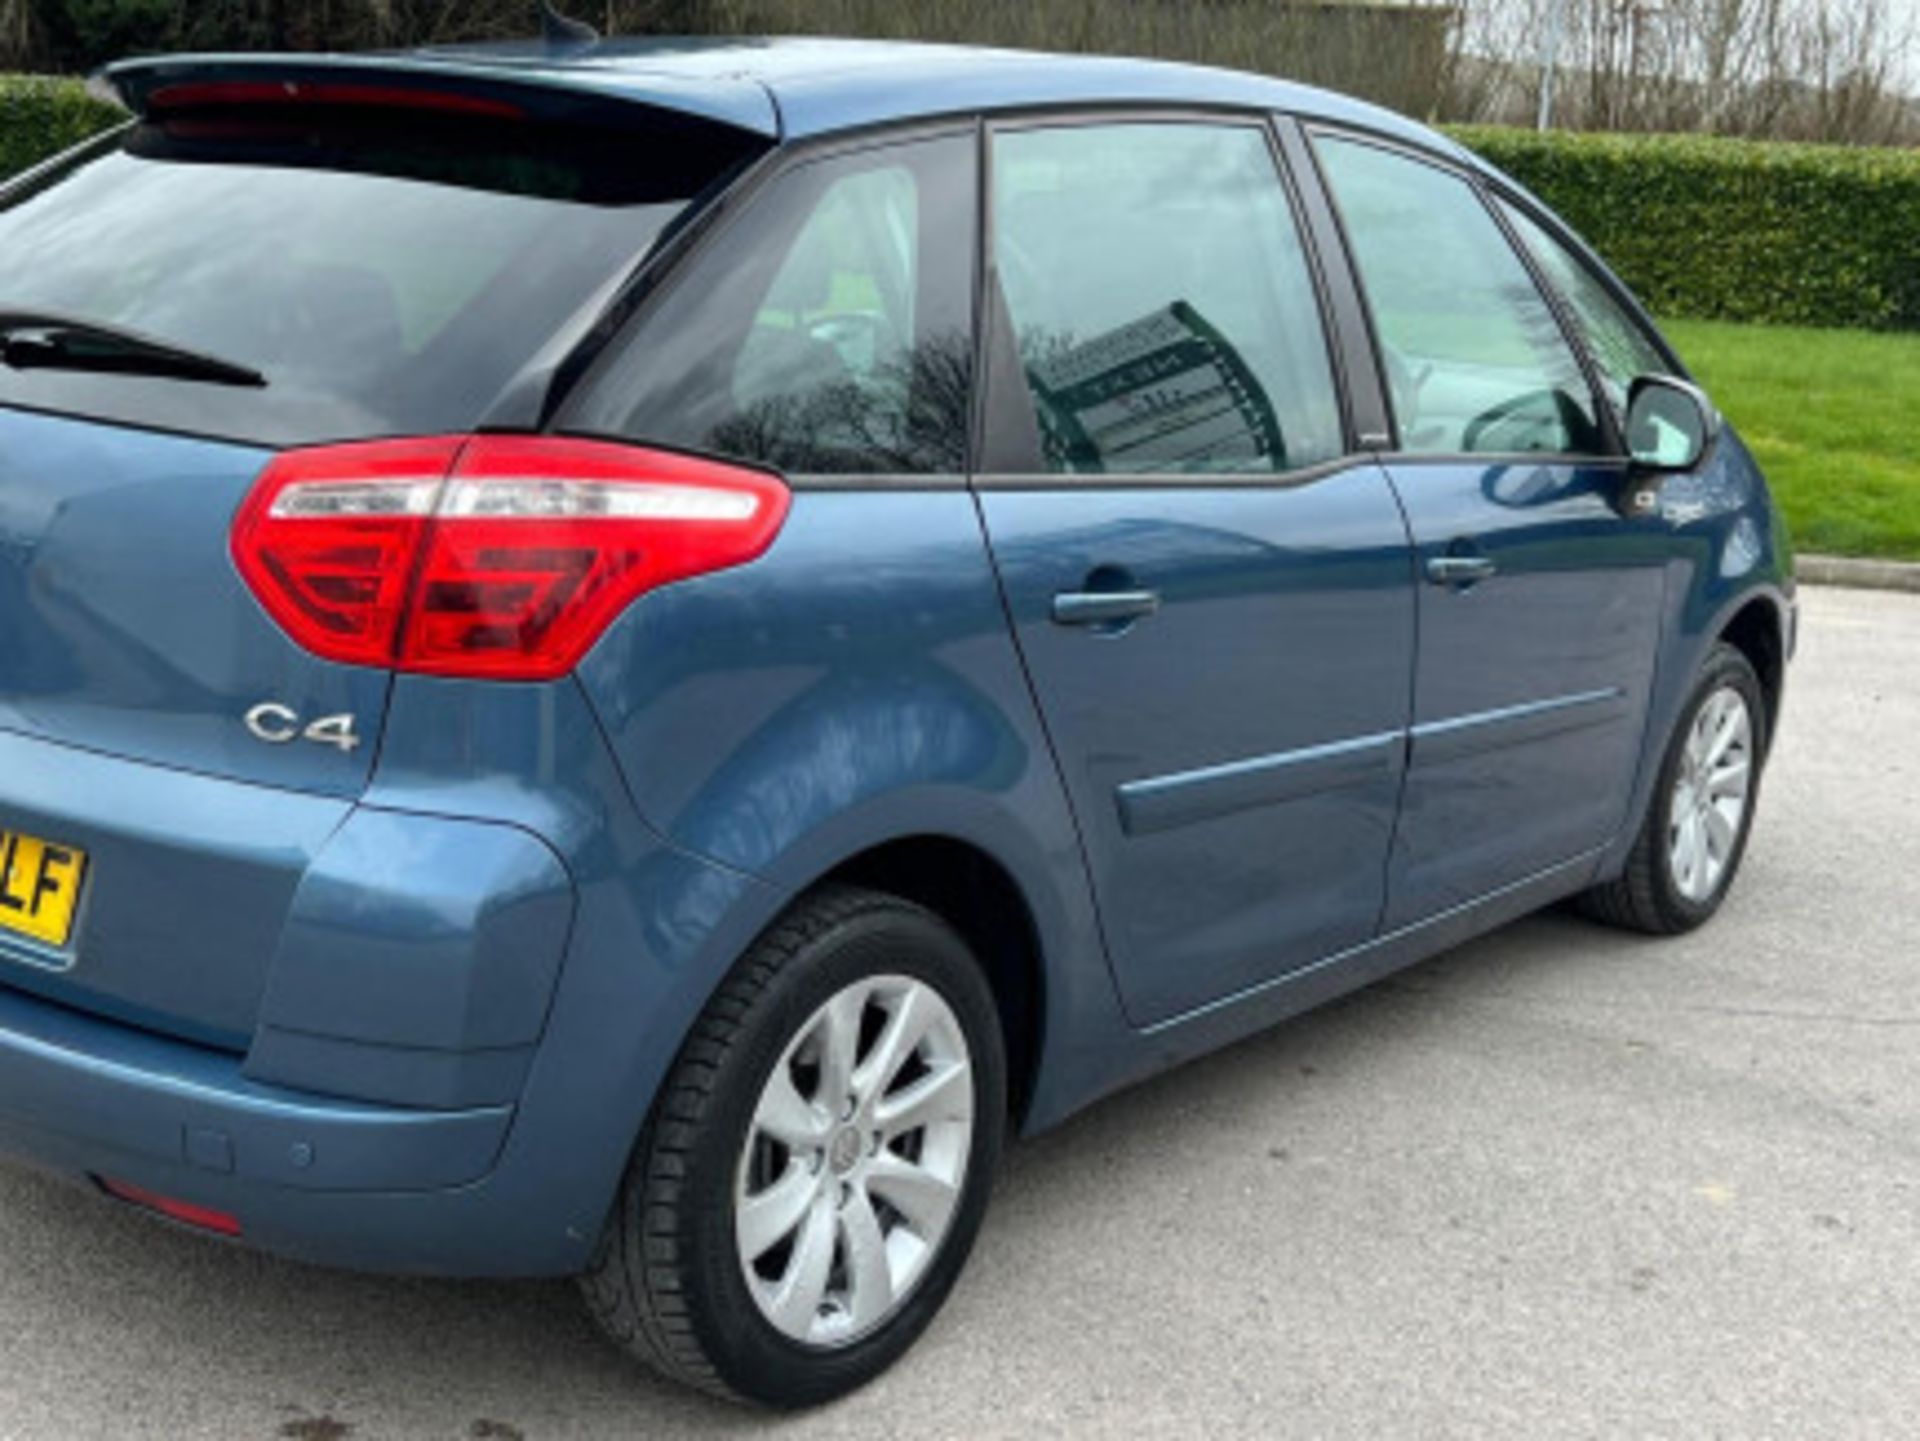 2009 CITROEN C4 PICASSO 1.6 HDI VTR+ EGS6 5DR >>--NO VAT ON HAMMER--<< - Image 43 of 123